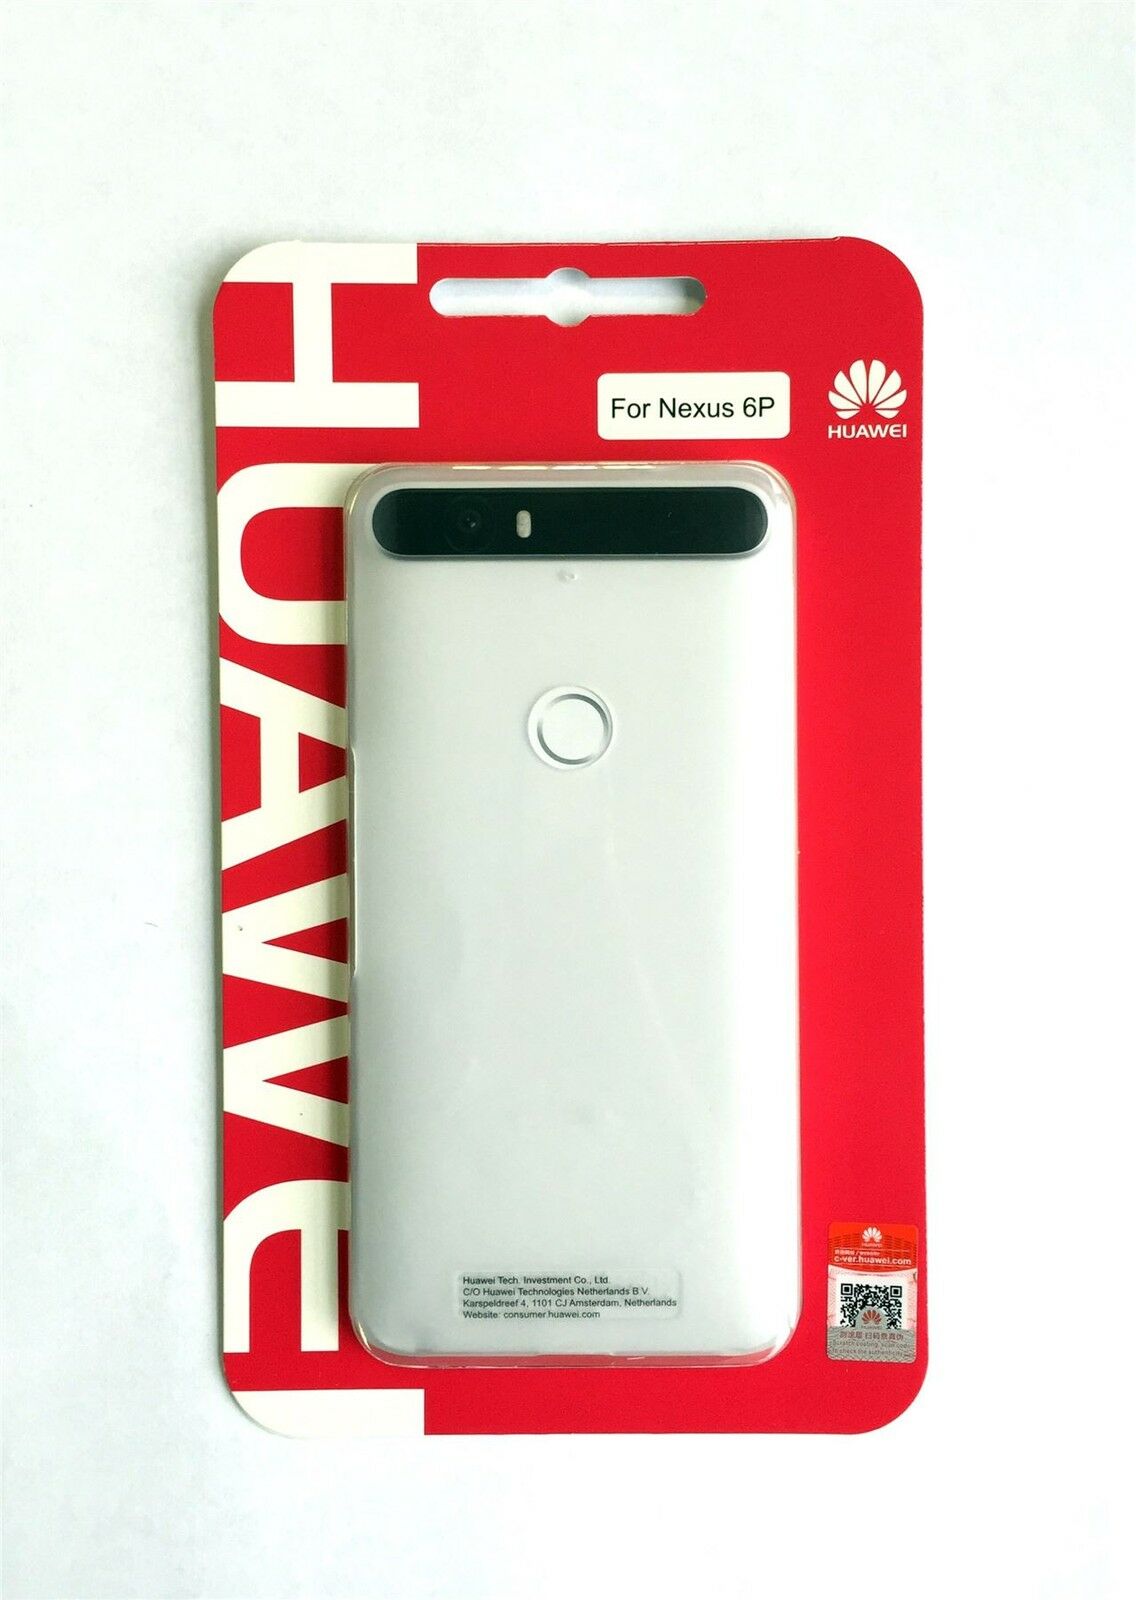 GENUINE HUAWEI TRANSLUCENT CLEAR HARD CASE COVER FOR HUAWEI GOOGLE NEXUS 6P 2015